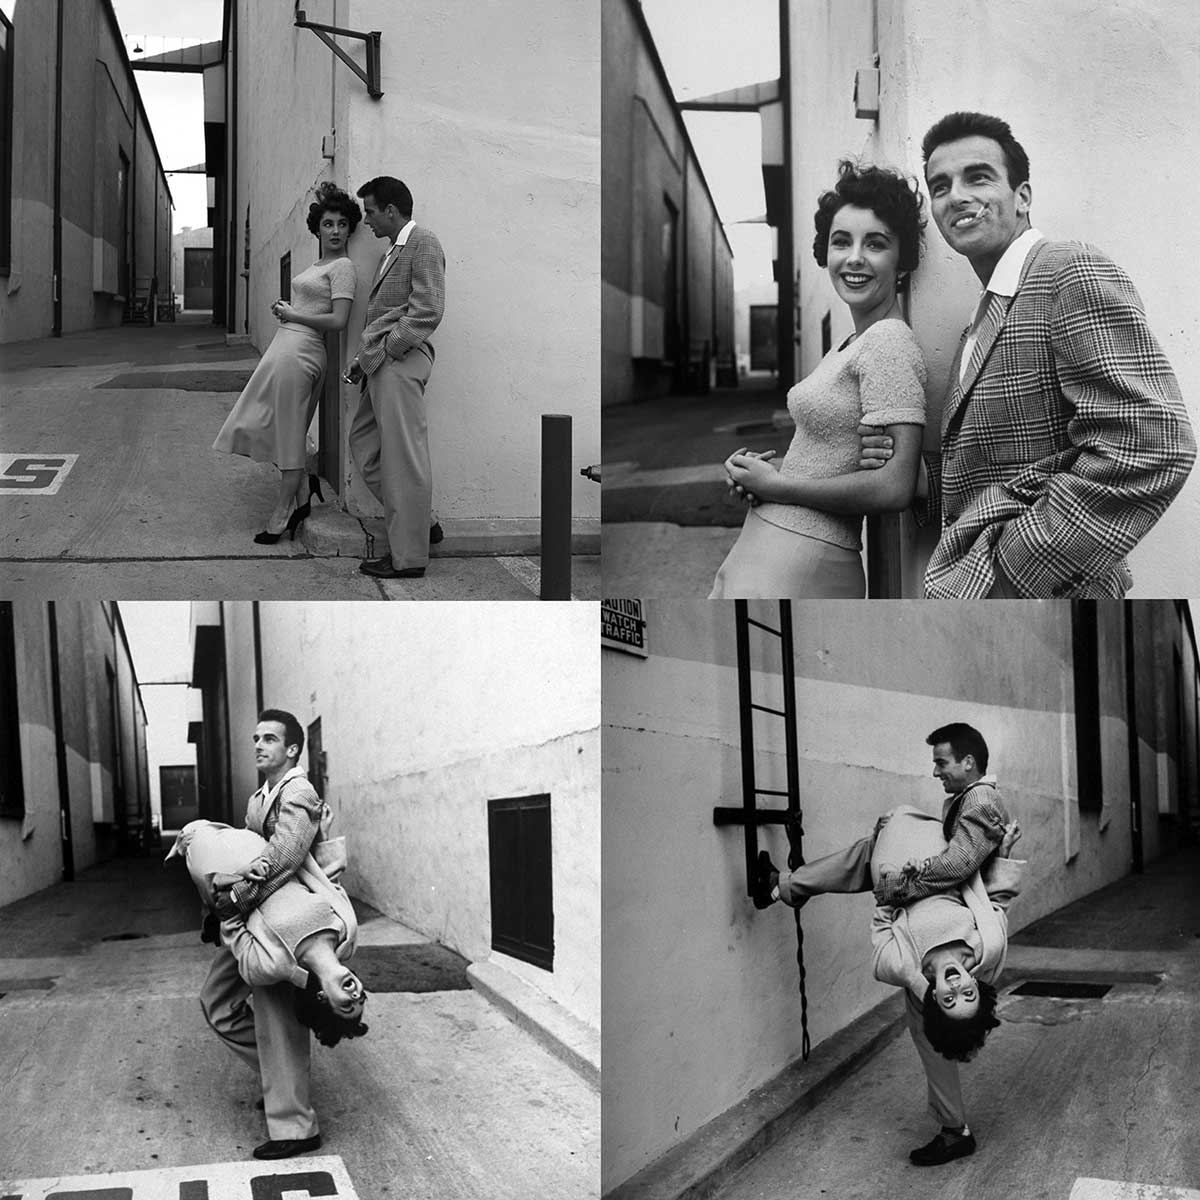 Elizabeth Taylor and Montgomery Clift on the Paramount lot during a break in
filming A Place in the Sun, 1950.